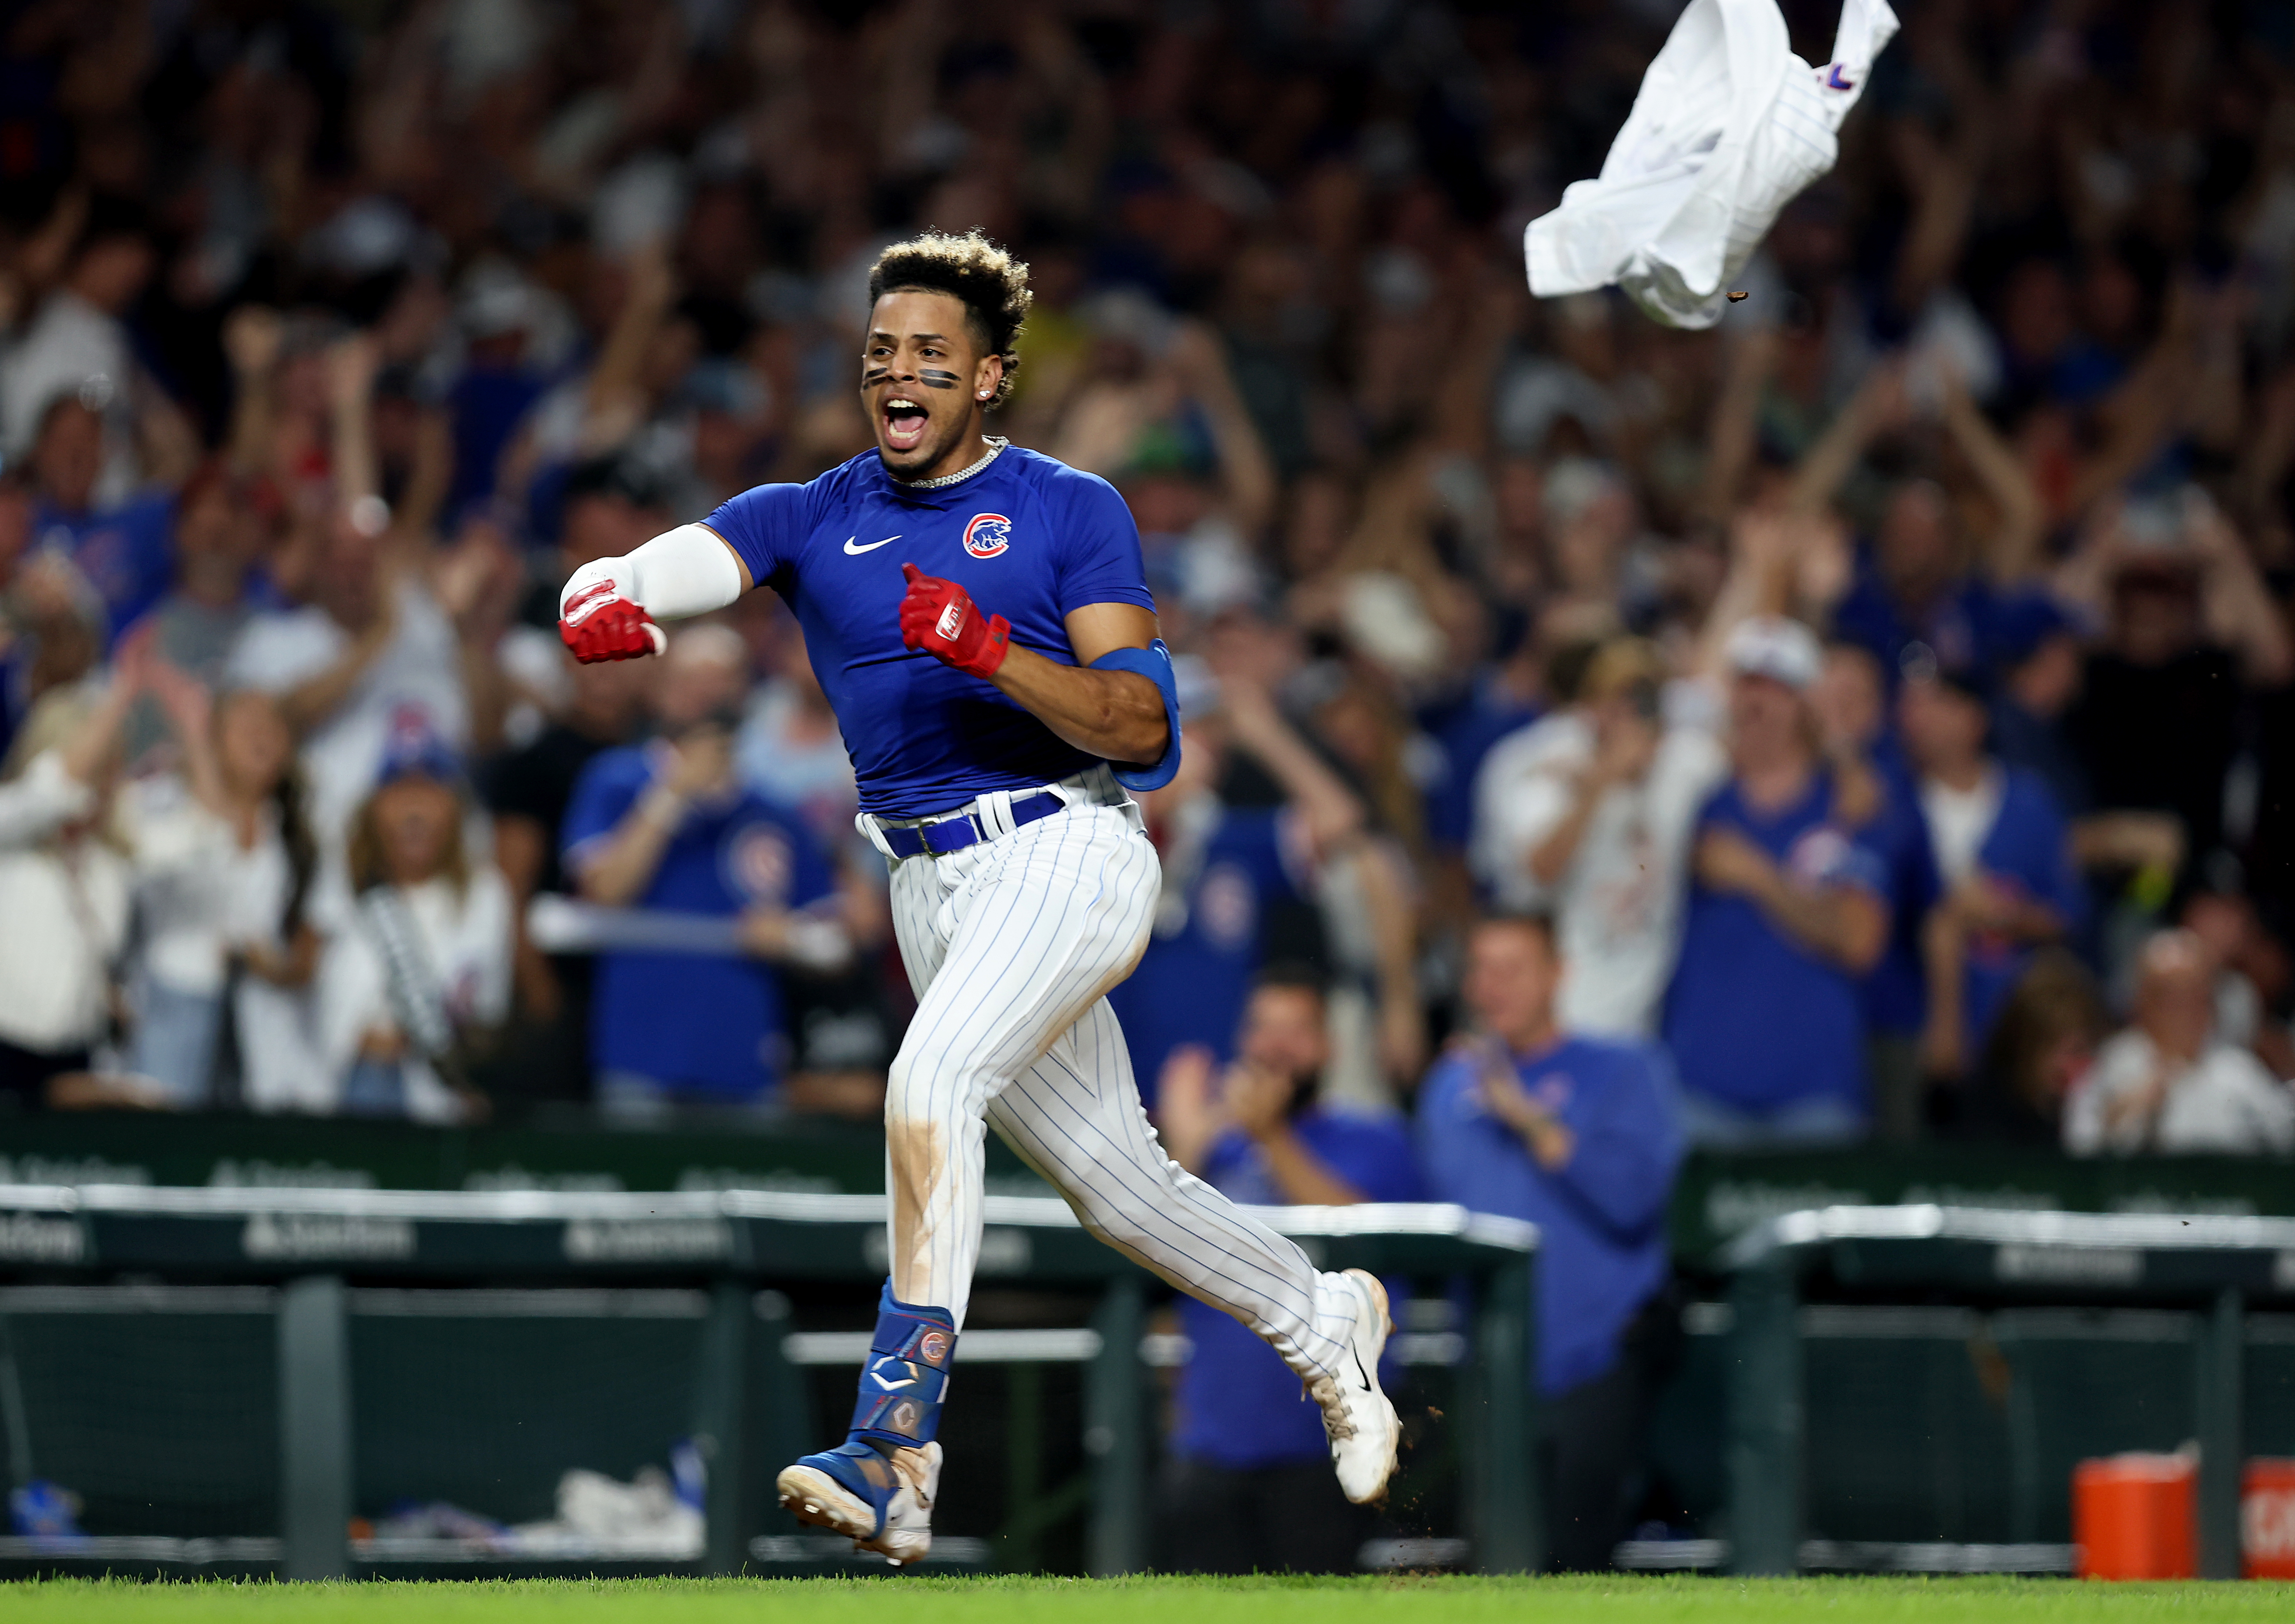 Where were you for the Christopher Morel Crosstown walk-off win